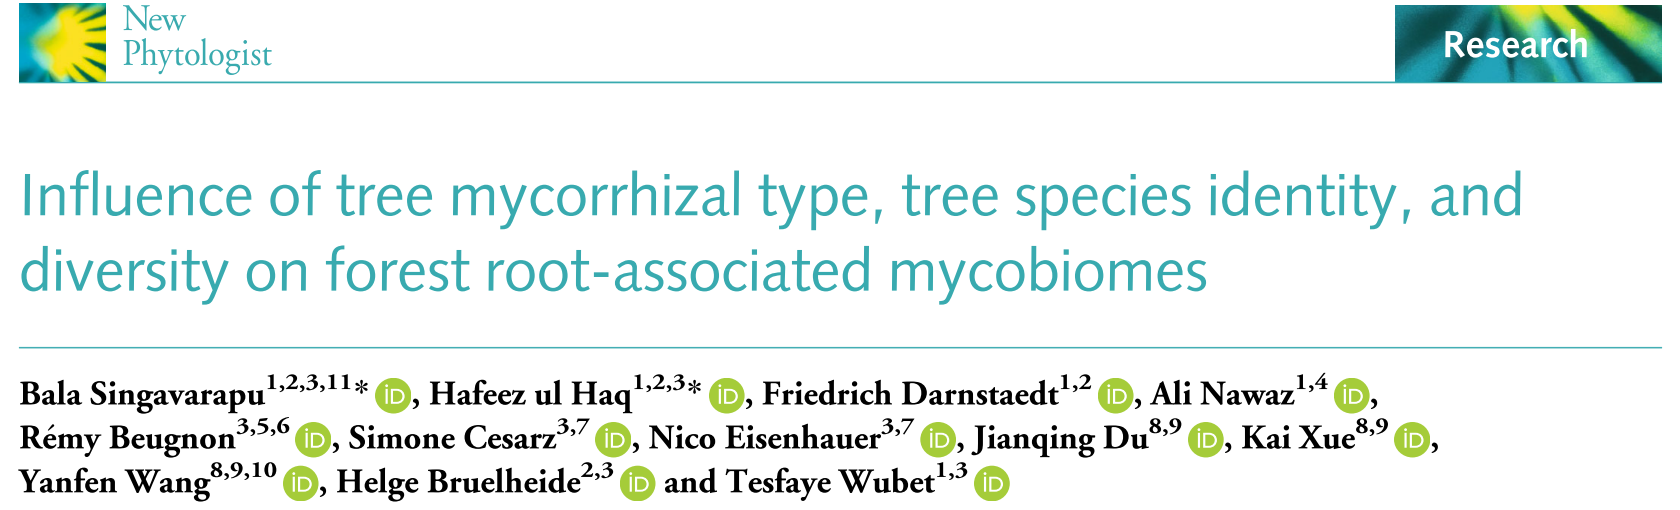 Influence of tree mycorrhizal type, tree species identity, and diversity on forest root-associated mycobiomes